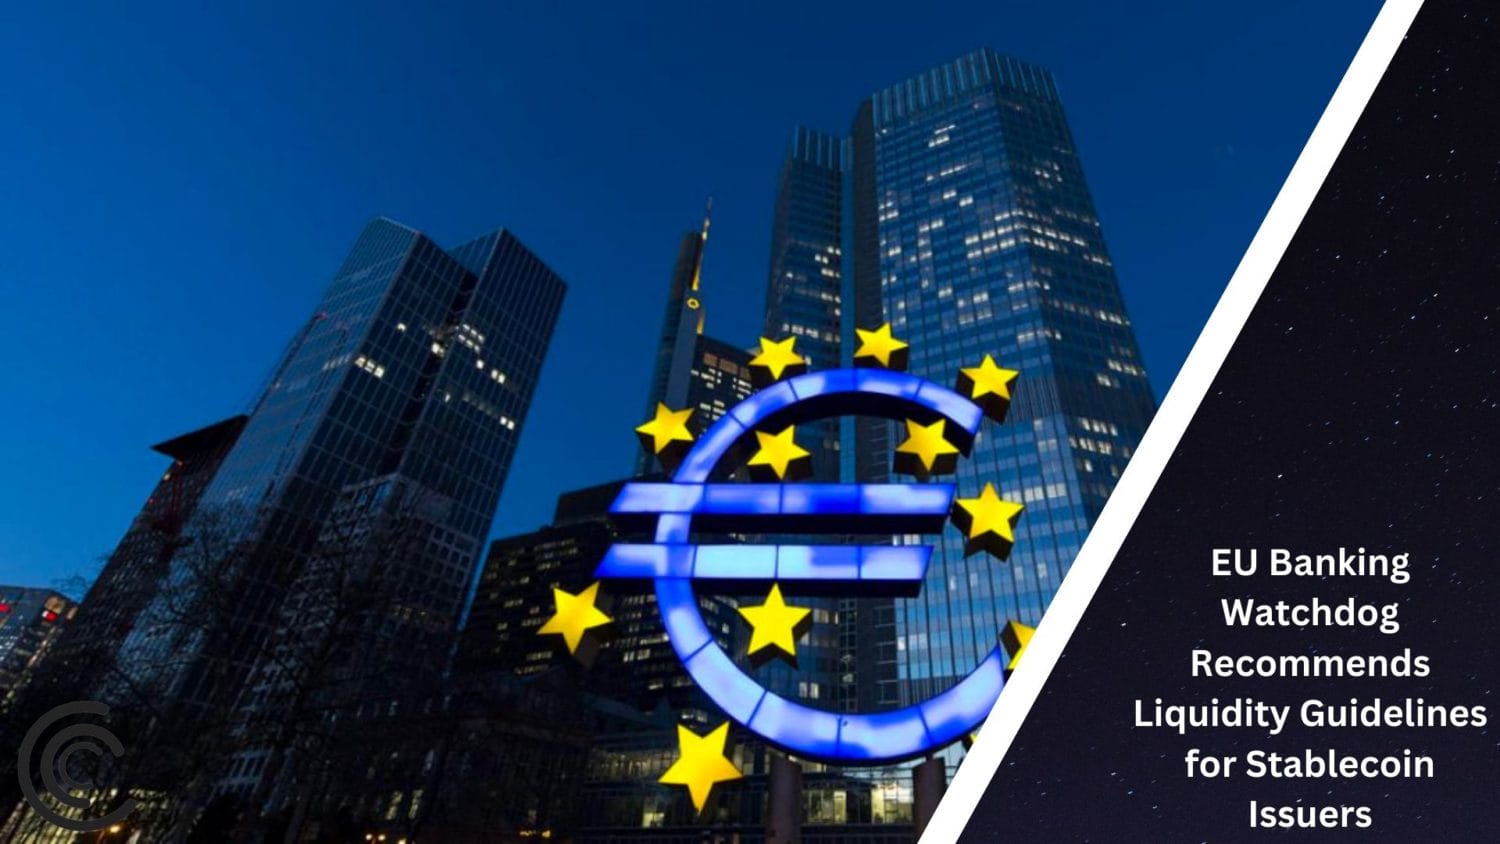 Eu Banking Watchdog Recommends Liquidity Guidelines For Stablecoin Issuers